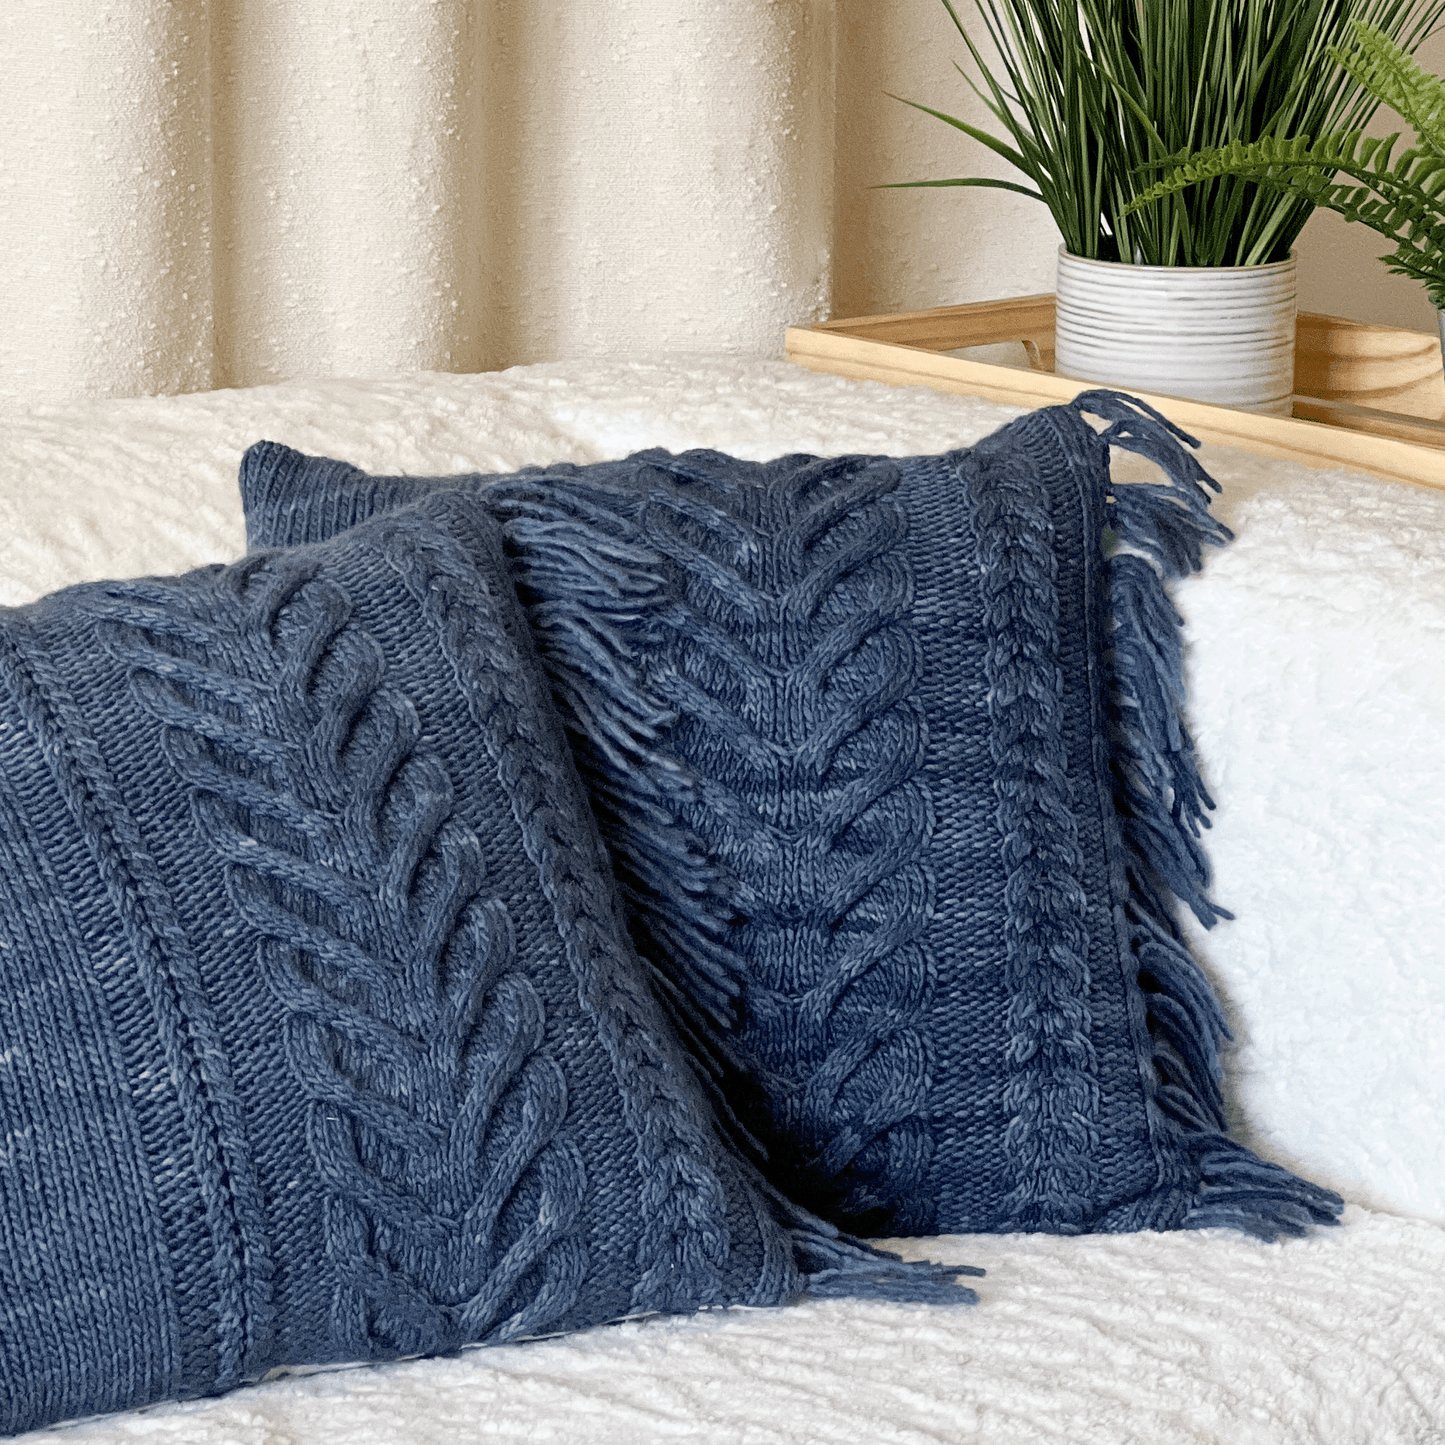 Two staghorn cabled pillows are better than one! This is the only time to date that I've knit a matching pair, which look great sitting side by side on the couch..